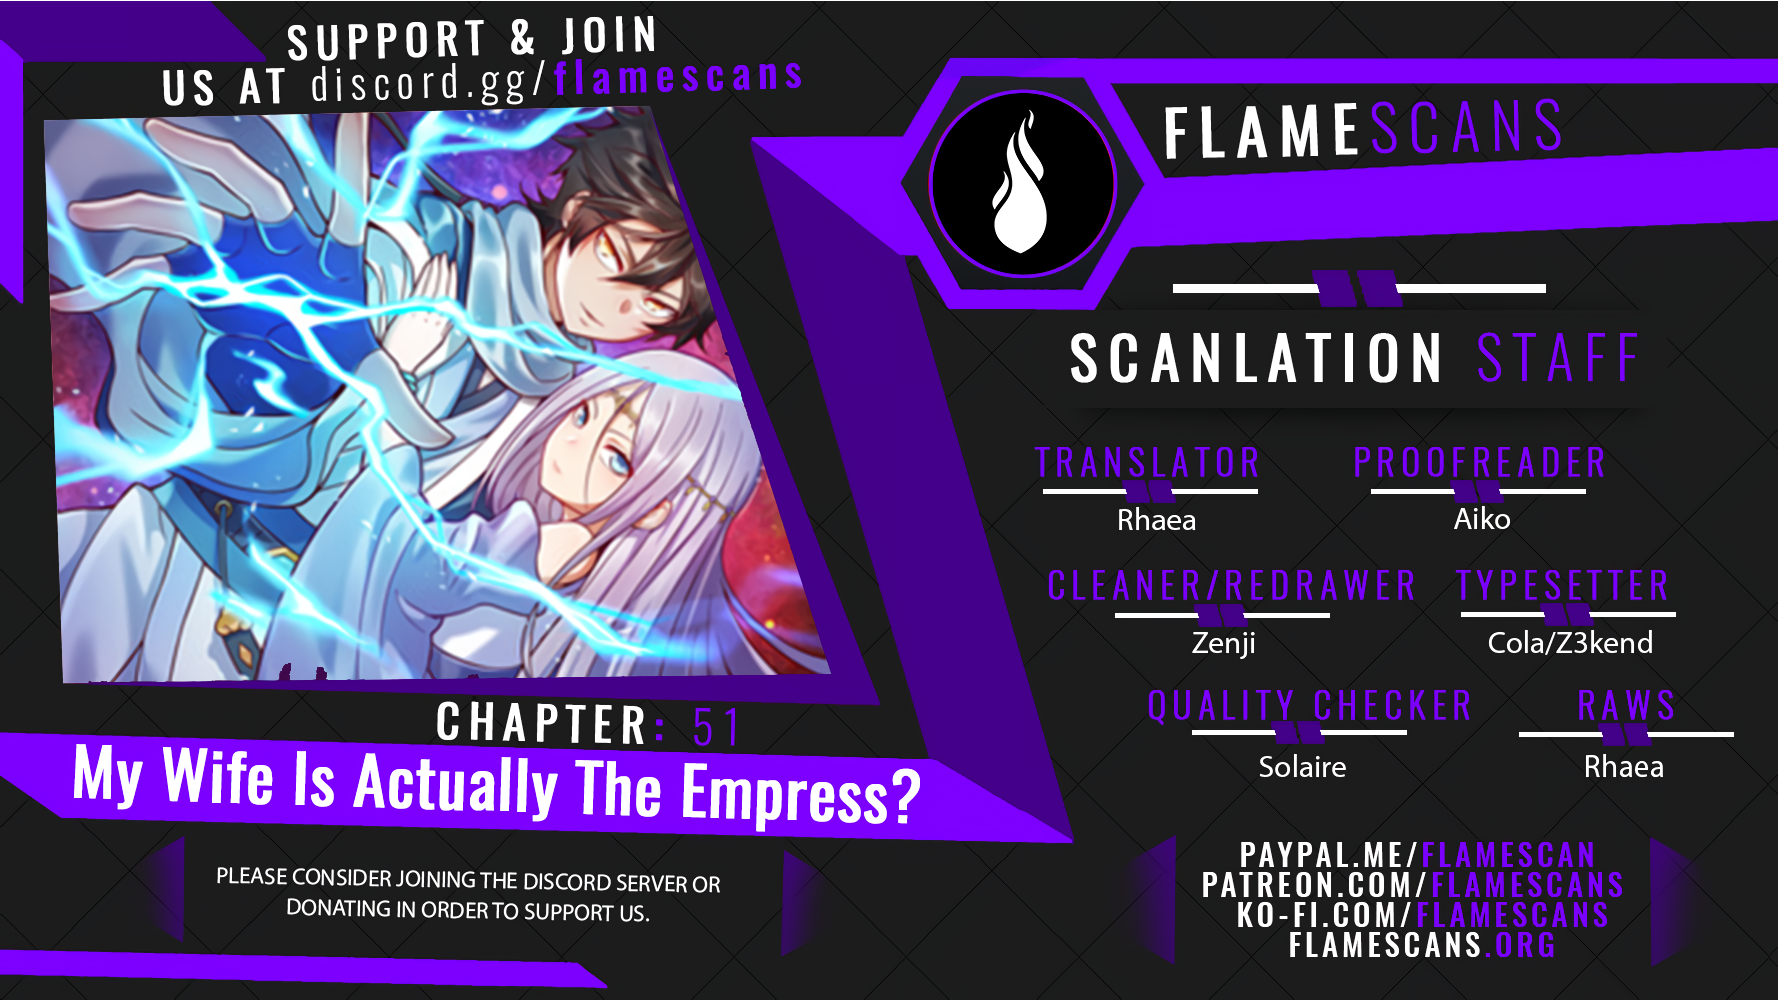 My Wife Is Actually The Empress? - Chapter 11091 - Image 1